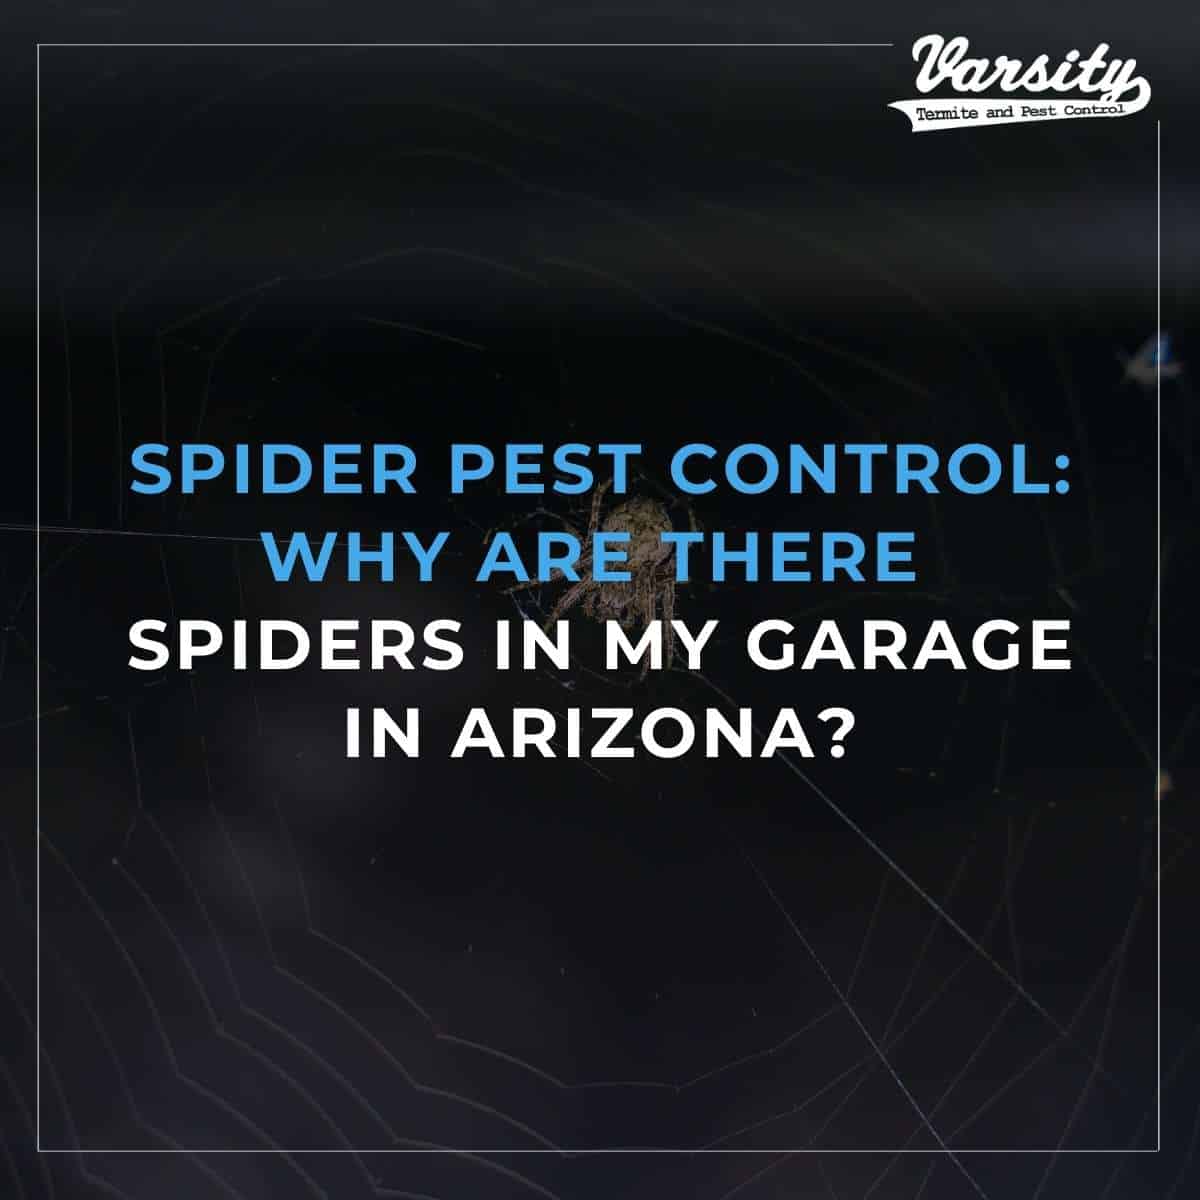 Spiders Pest Control: Why Are There Spiders In My Garage In Arizona?